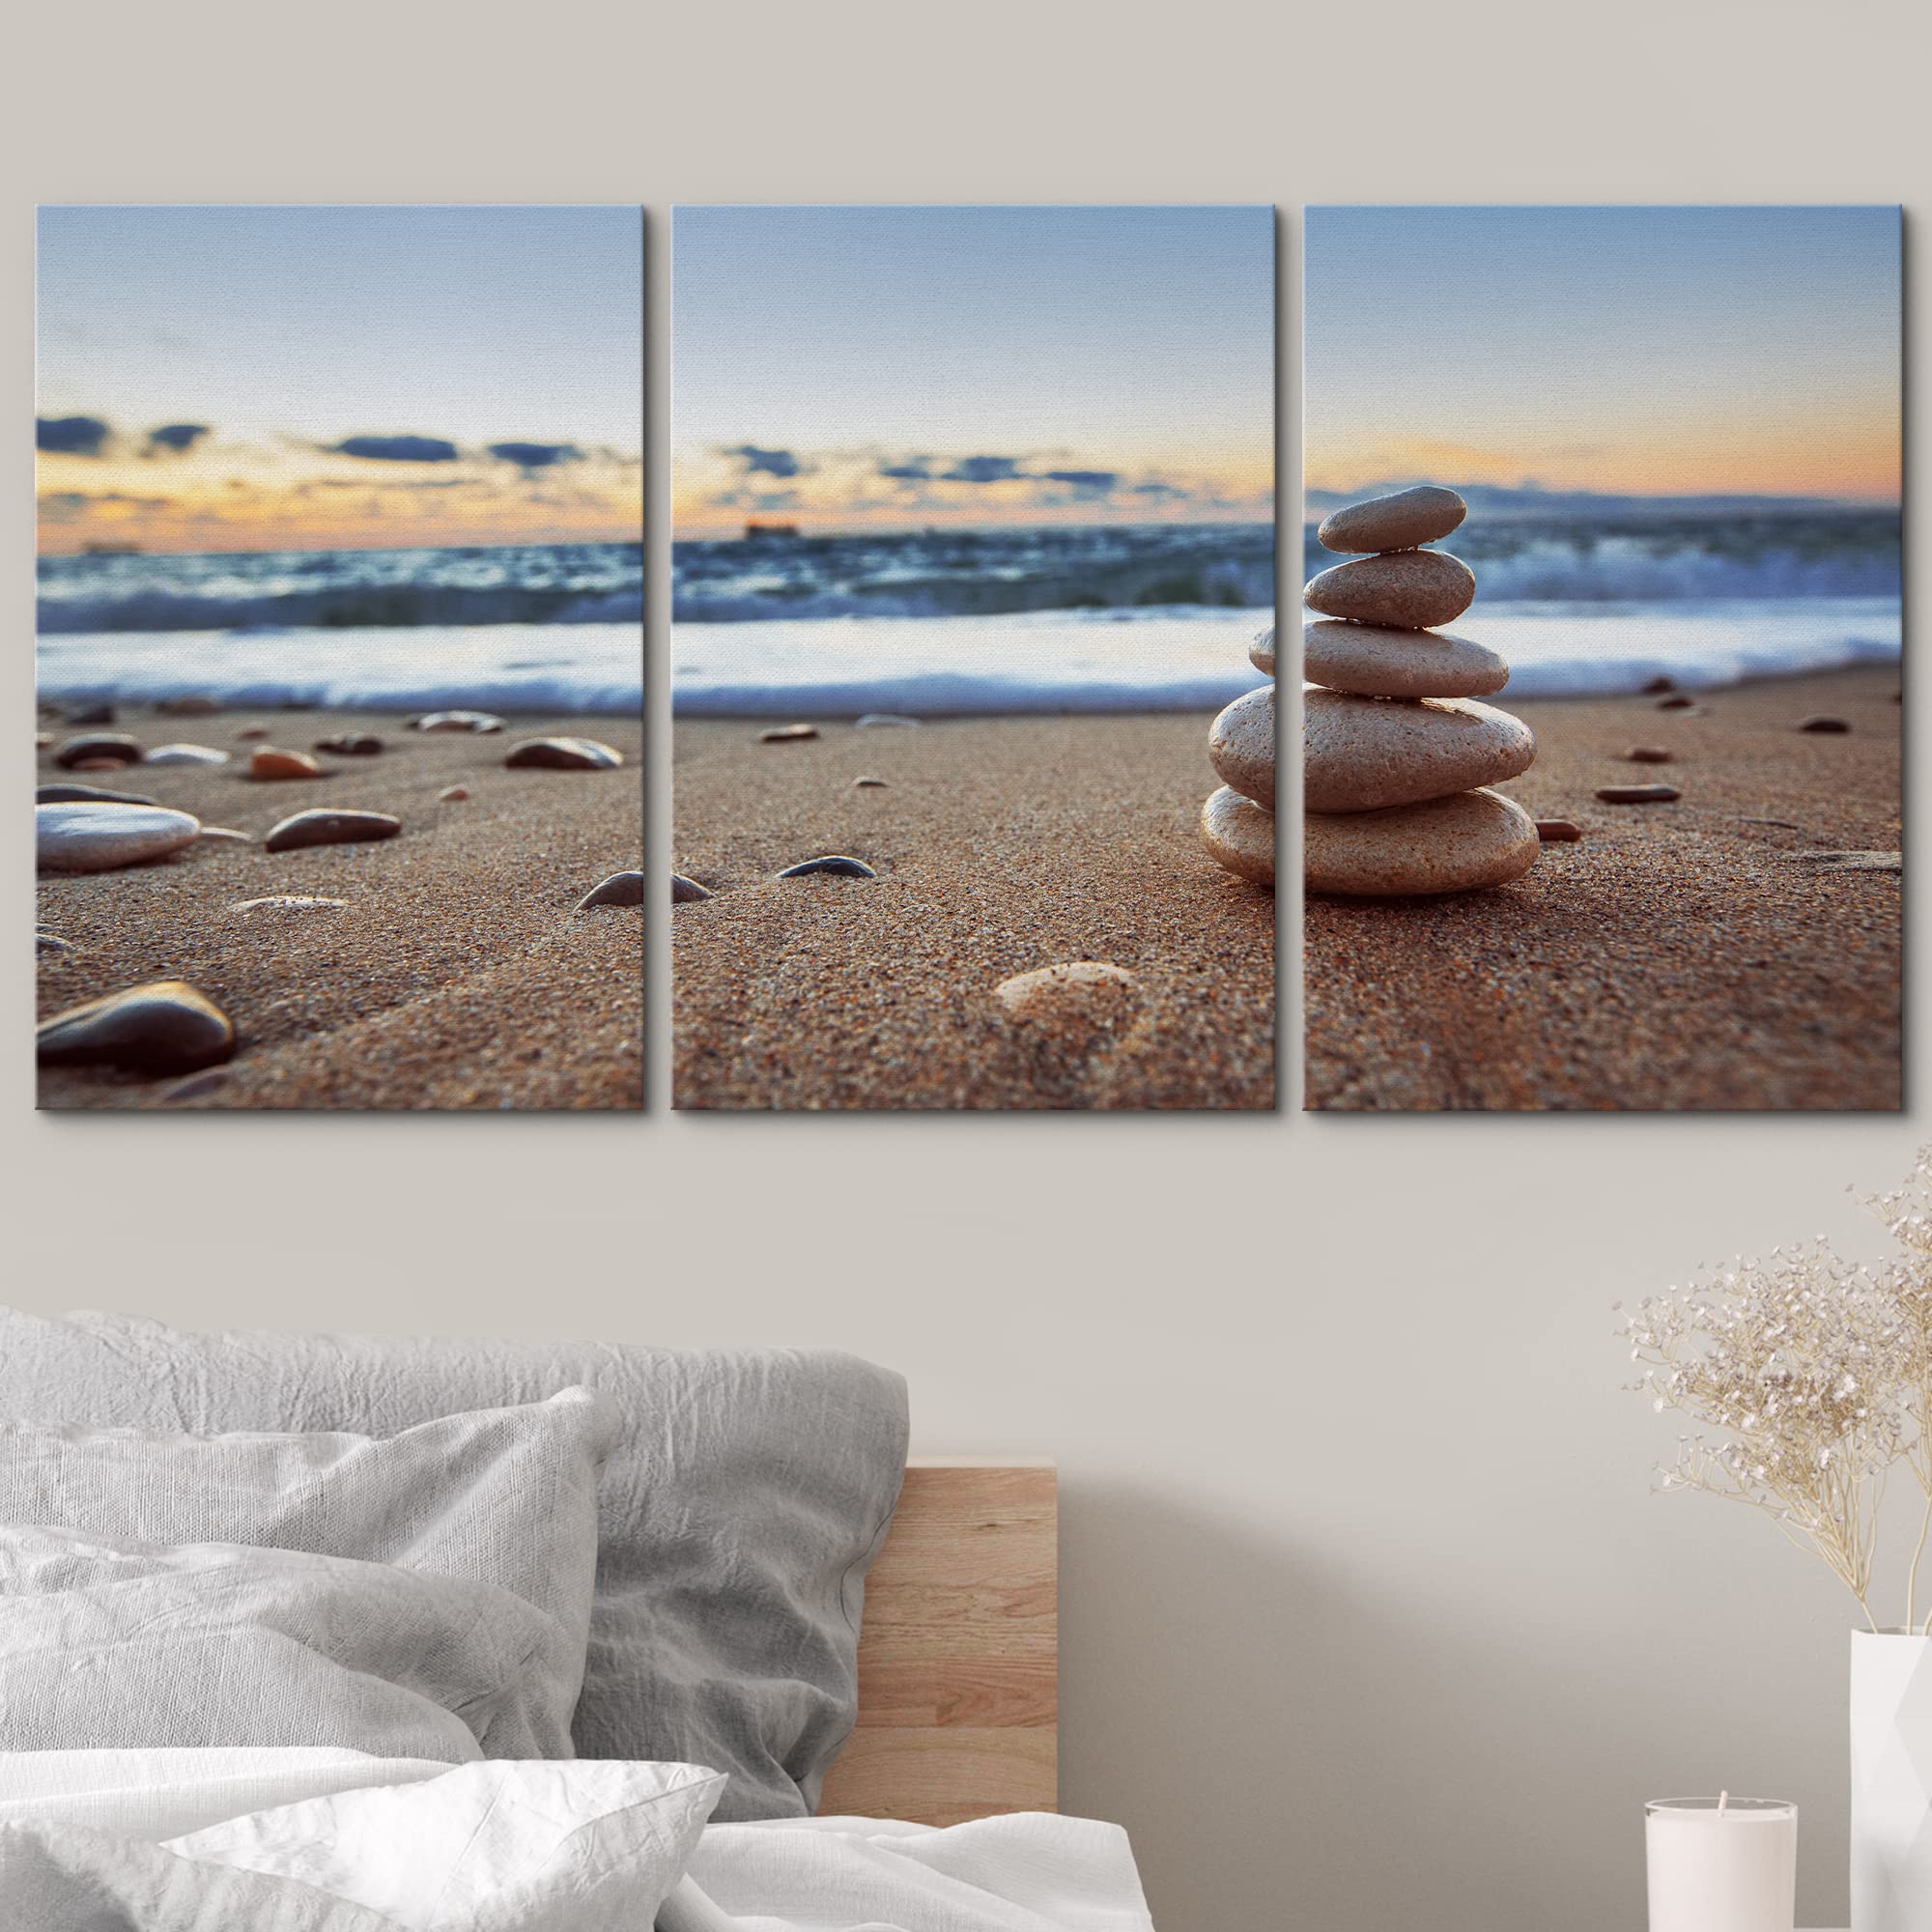 wall26 Canvas Print Wall Art Set Pebbles Along The Ocean Beach Coast Nature Wilderness Photography Realism Chic Scenic Relax/Calm Multicolor for Living Room, Bedroom, Office - 16&quot;x24&quot;x3 Pan - image 3 of 5